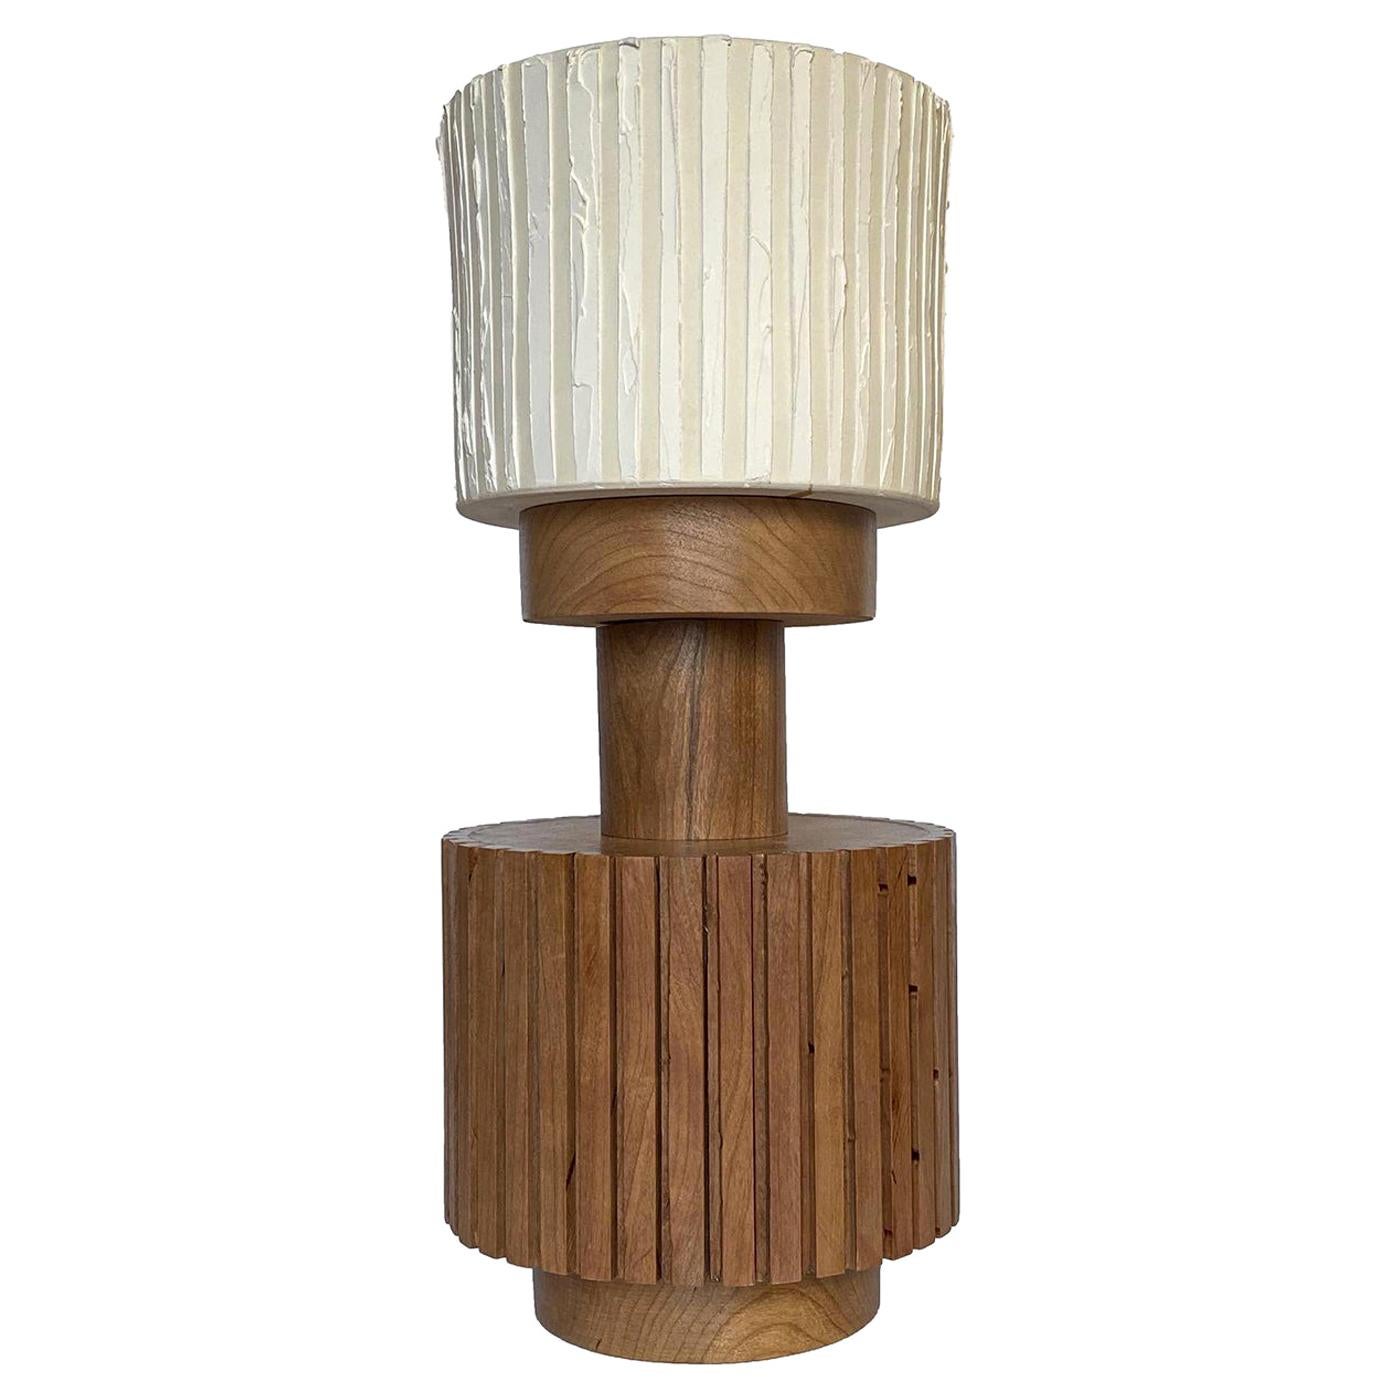 Totem Table Lamp by Mascia Meccani #6 For Sale